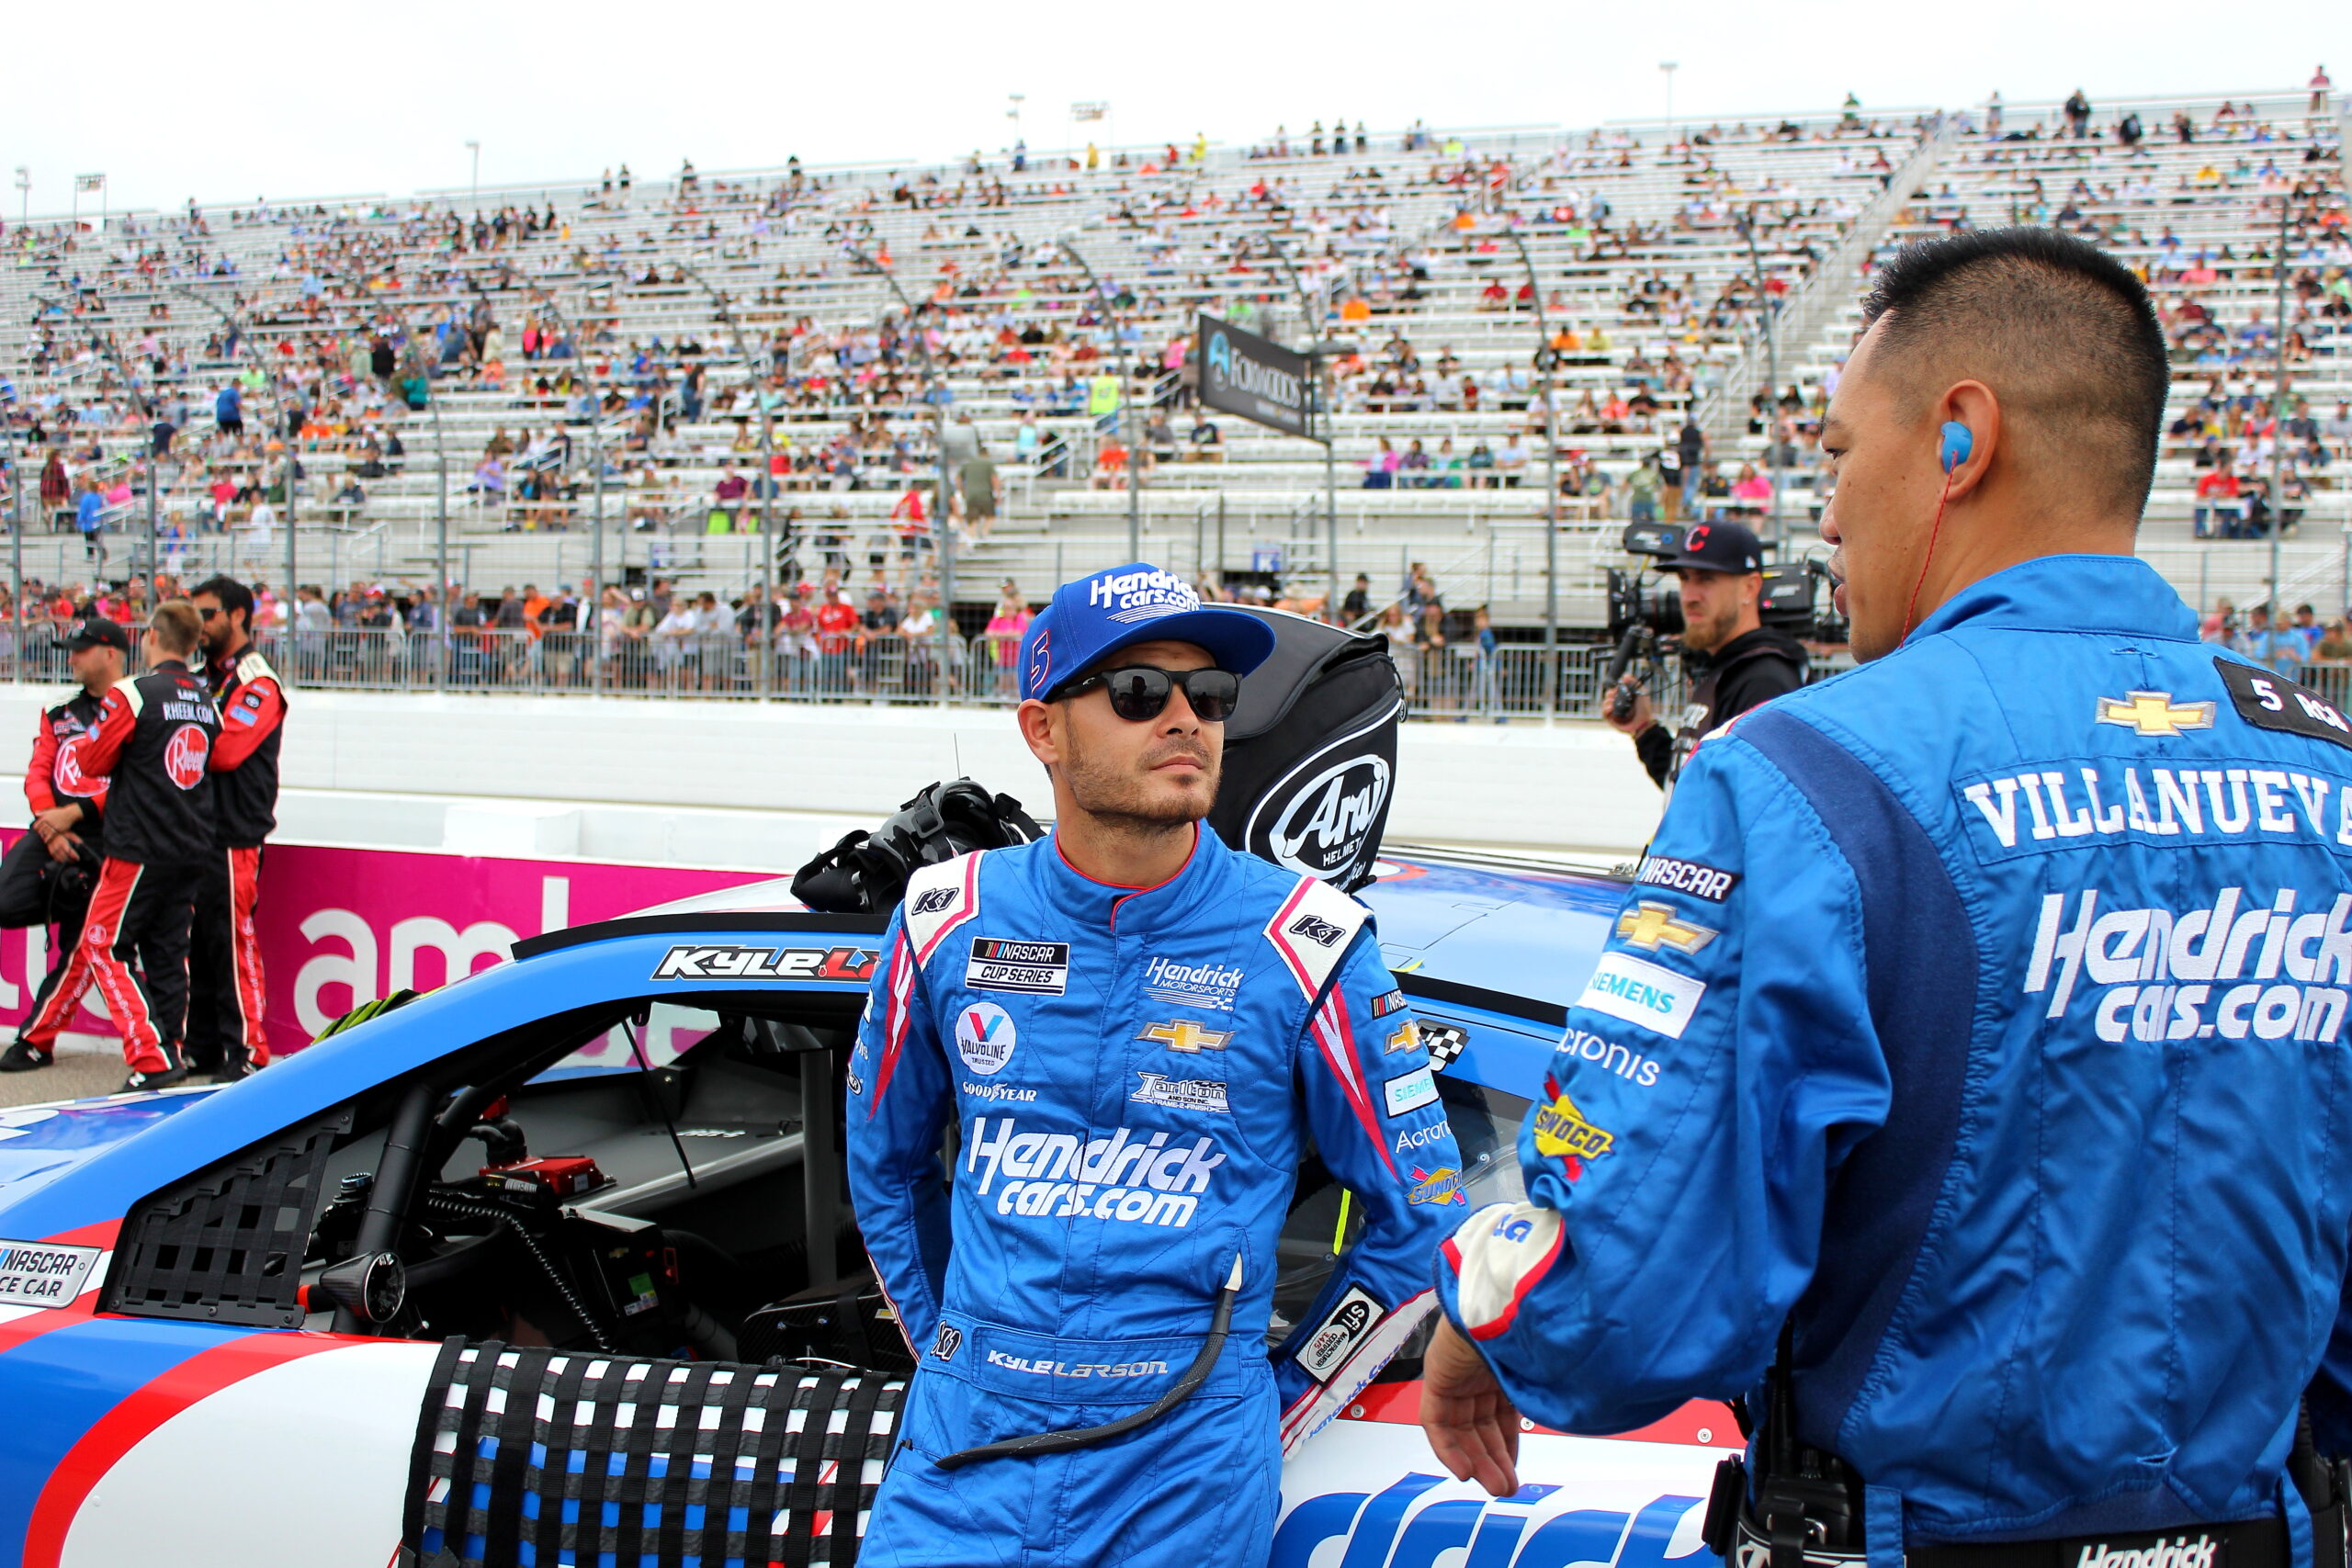 "We have a shot to win anywhere right now. That's encouraging." - Kyle Larson (Photo: Josh Jones | The Podium Finish)